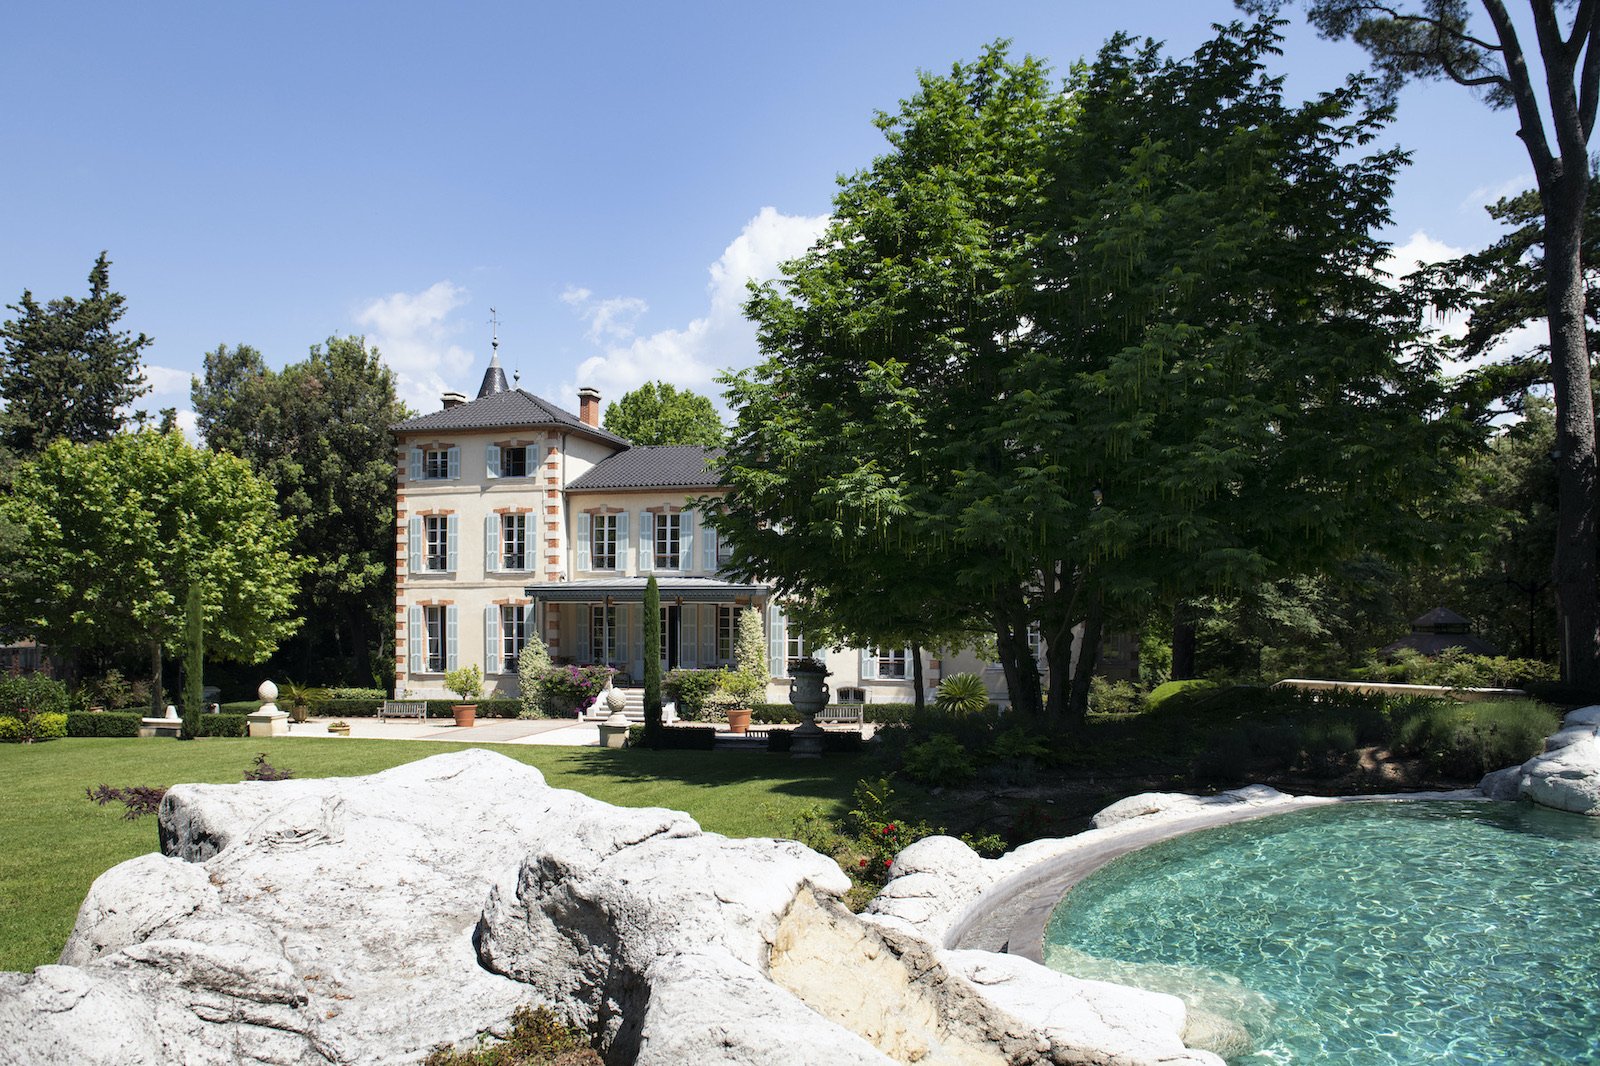 Exceptional Provencal chateau in Marseille set in a park typical of the south of France